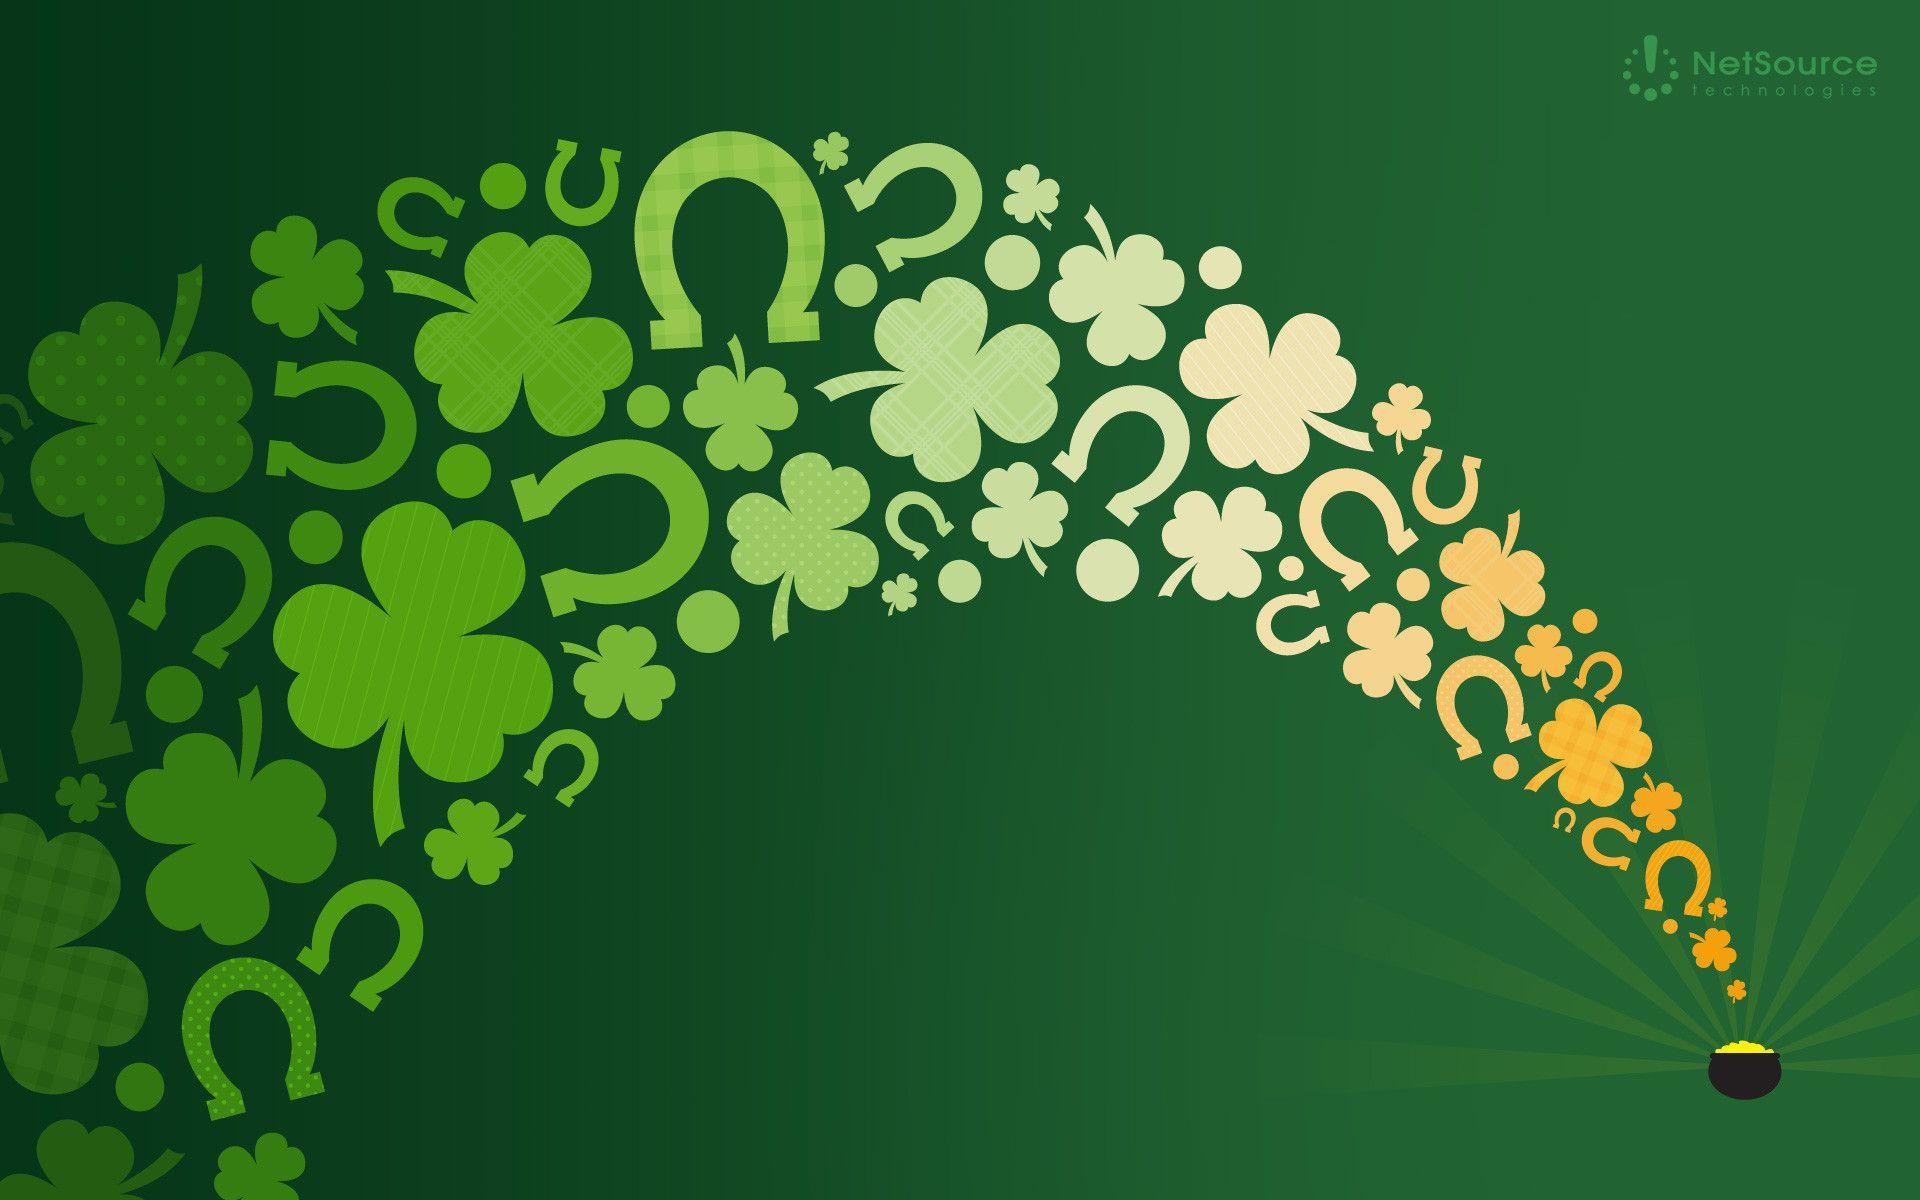 St Patricks Day HD Wallpapers  HD Wallpapers InnWallpaper Safari  St  patricks day wallpaper St patrick Desktop wallpapers backgrounds